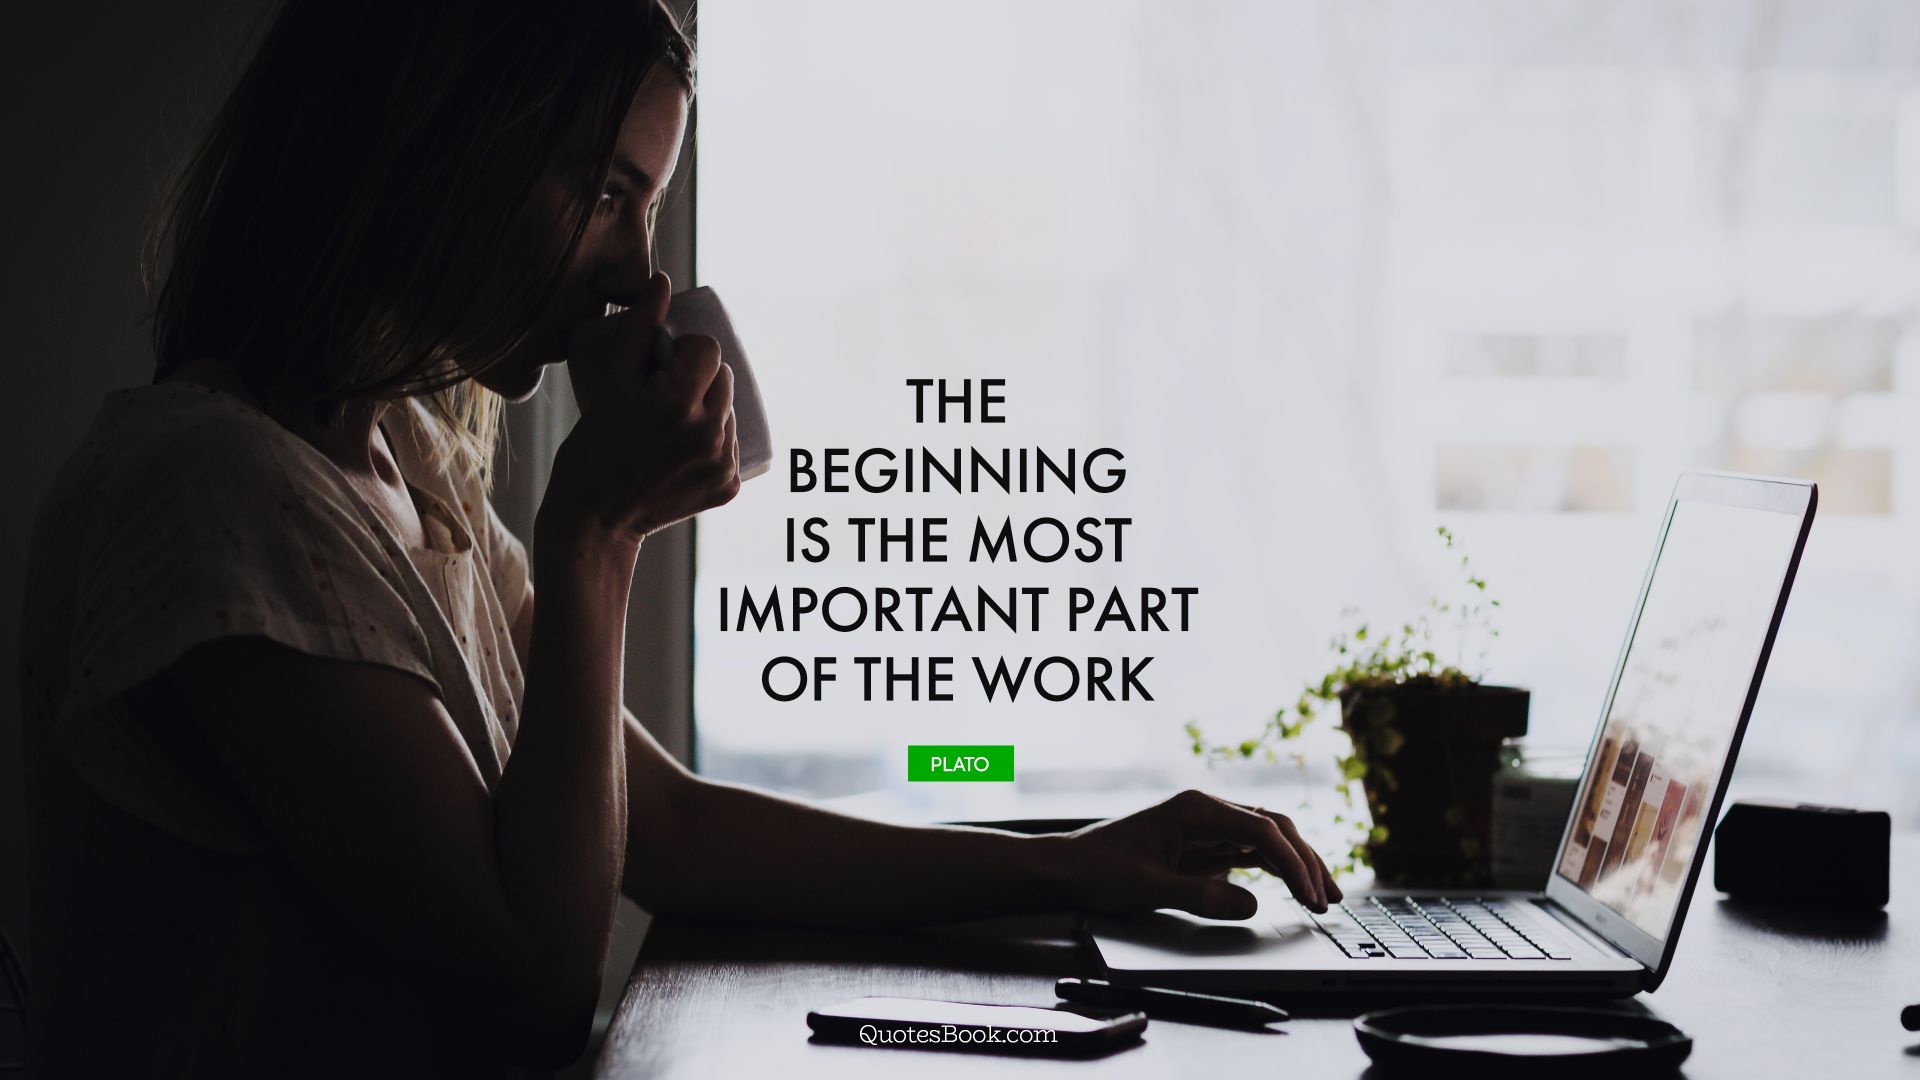 The beginning is the most important part of the work. - Quote by Plato